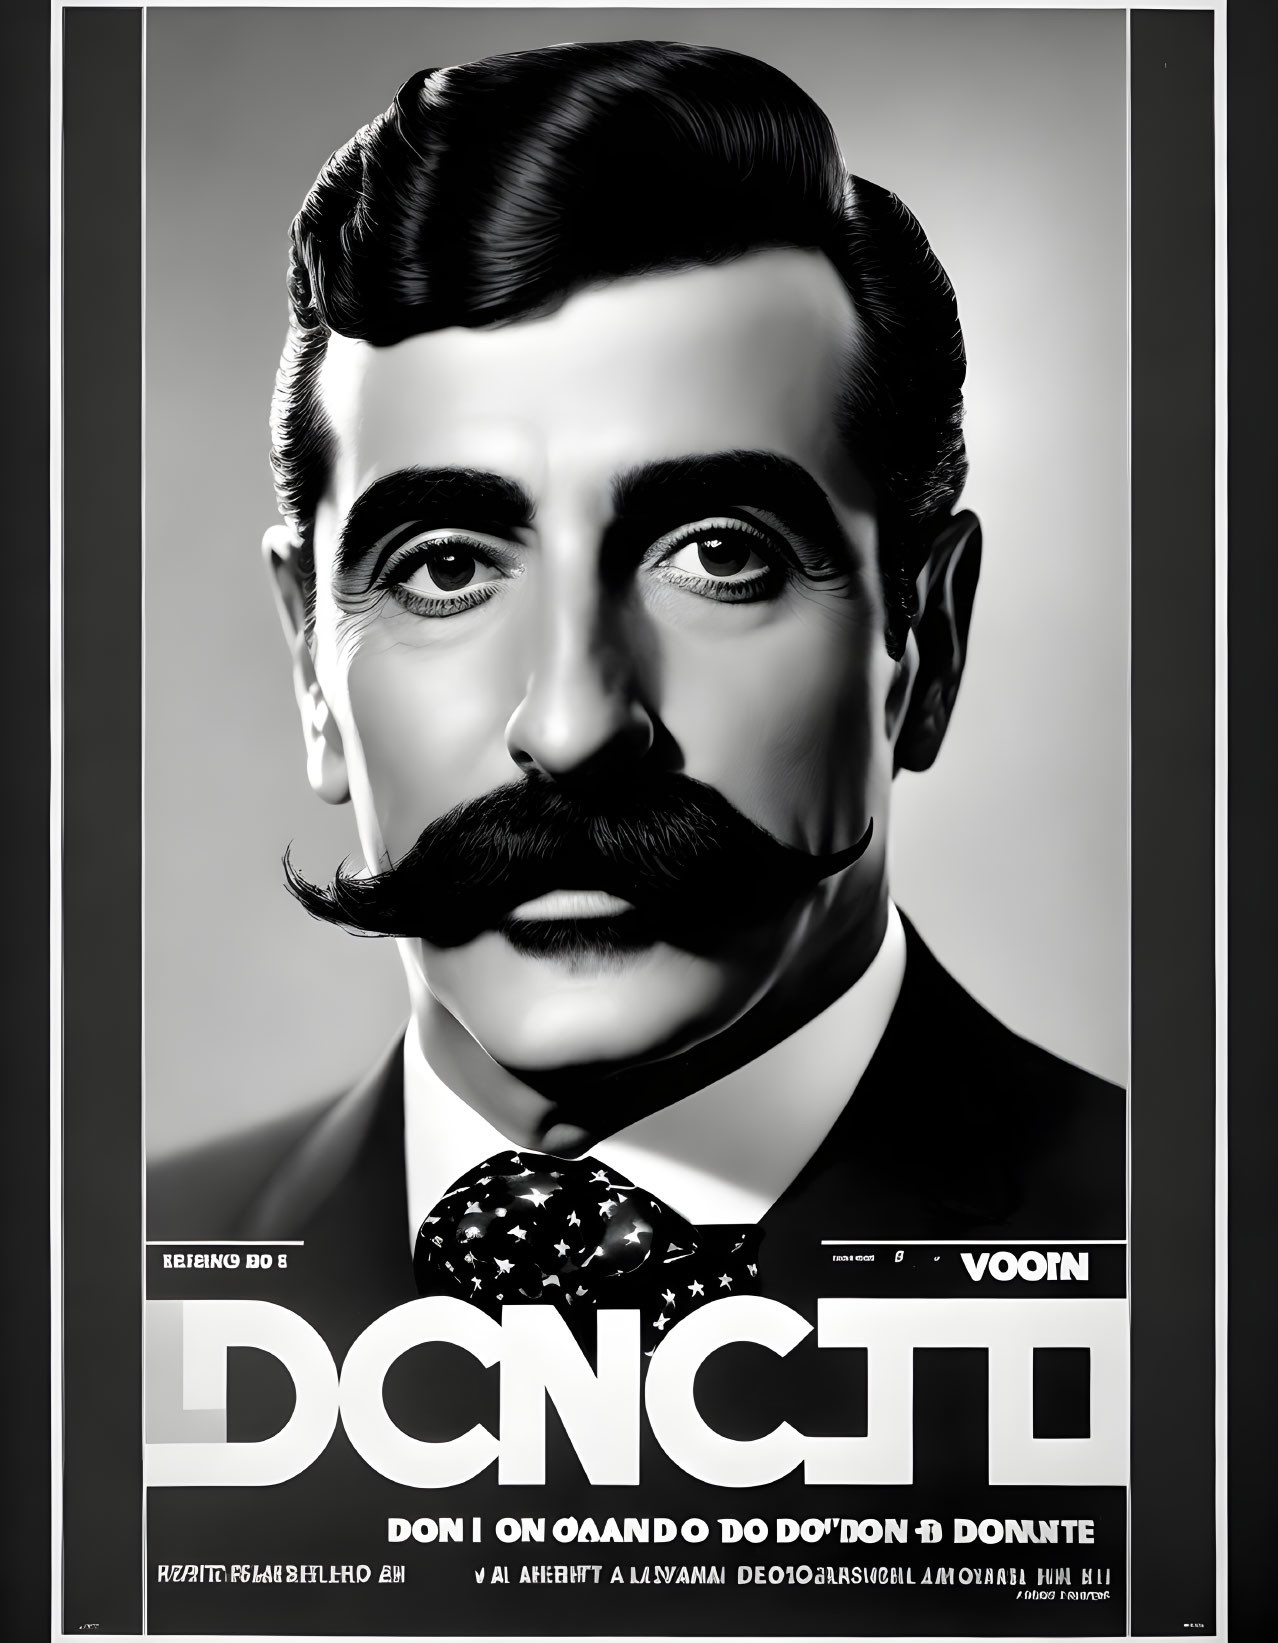 Monochrome Vintage-Style Poster of a Stylish Man in Suit